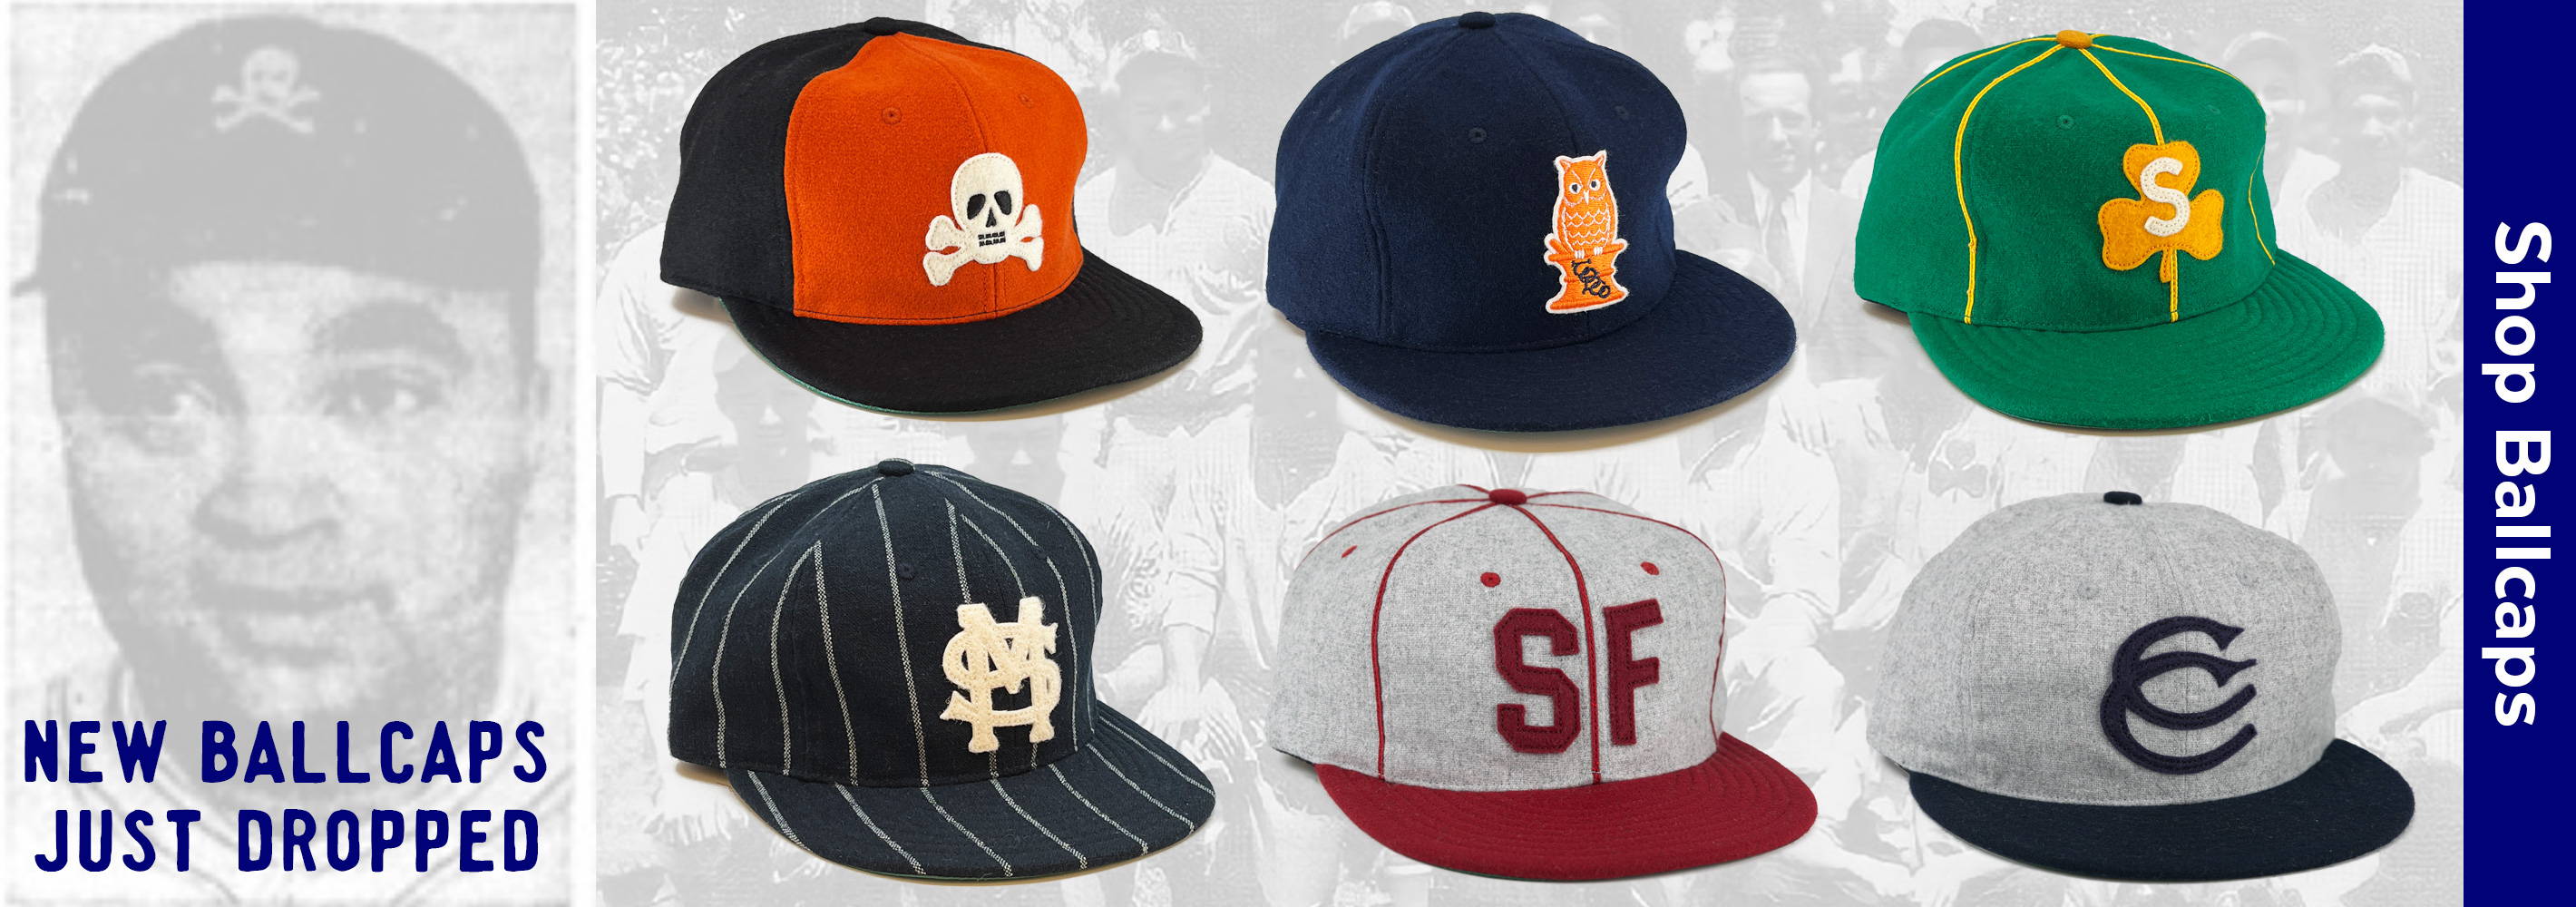 Six hats from a new collection are displayed in two rows. From left to right they are: (top row) a black and orange hat with a skull and crossbones, a navy blue hat with an orange owl patch, a green hat with gold trim and a gold felt clover patch with a white felt 'S' in the center; (bottom row) a navy blue hat with white pinstripes and a cream felt interlocked 'SM', a gray hat with a  burgundy visor, burgundy trim and burgundy felt 'SF', a gray hat with a navy blue visor and navy blue felt interlocking 'CC'.